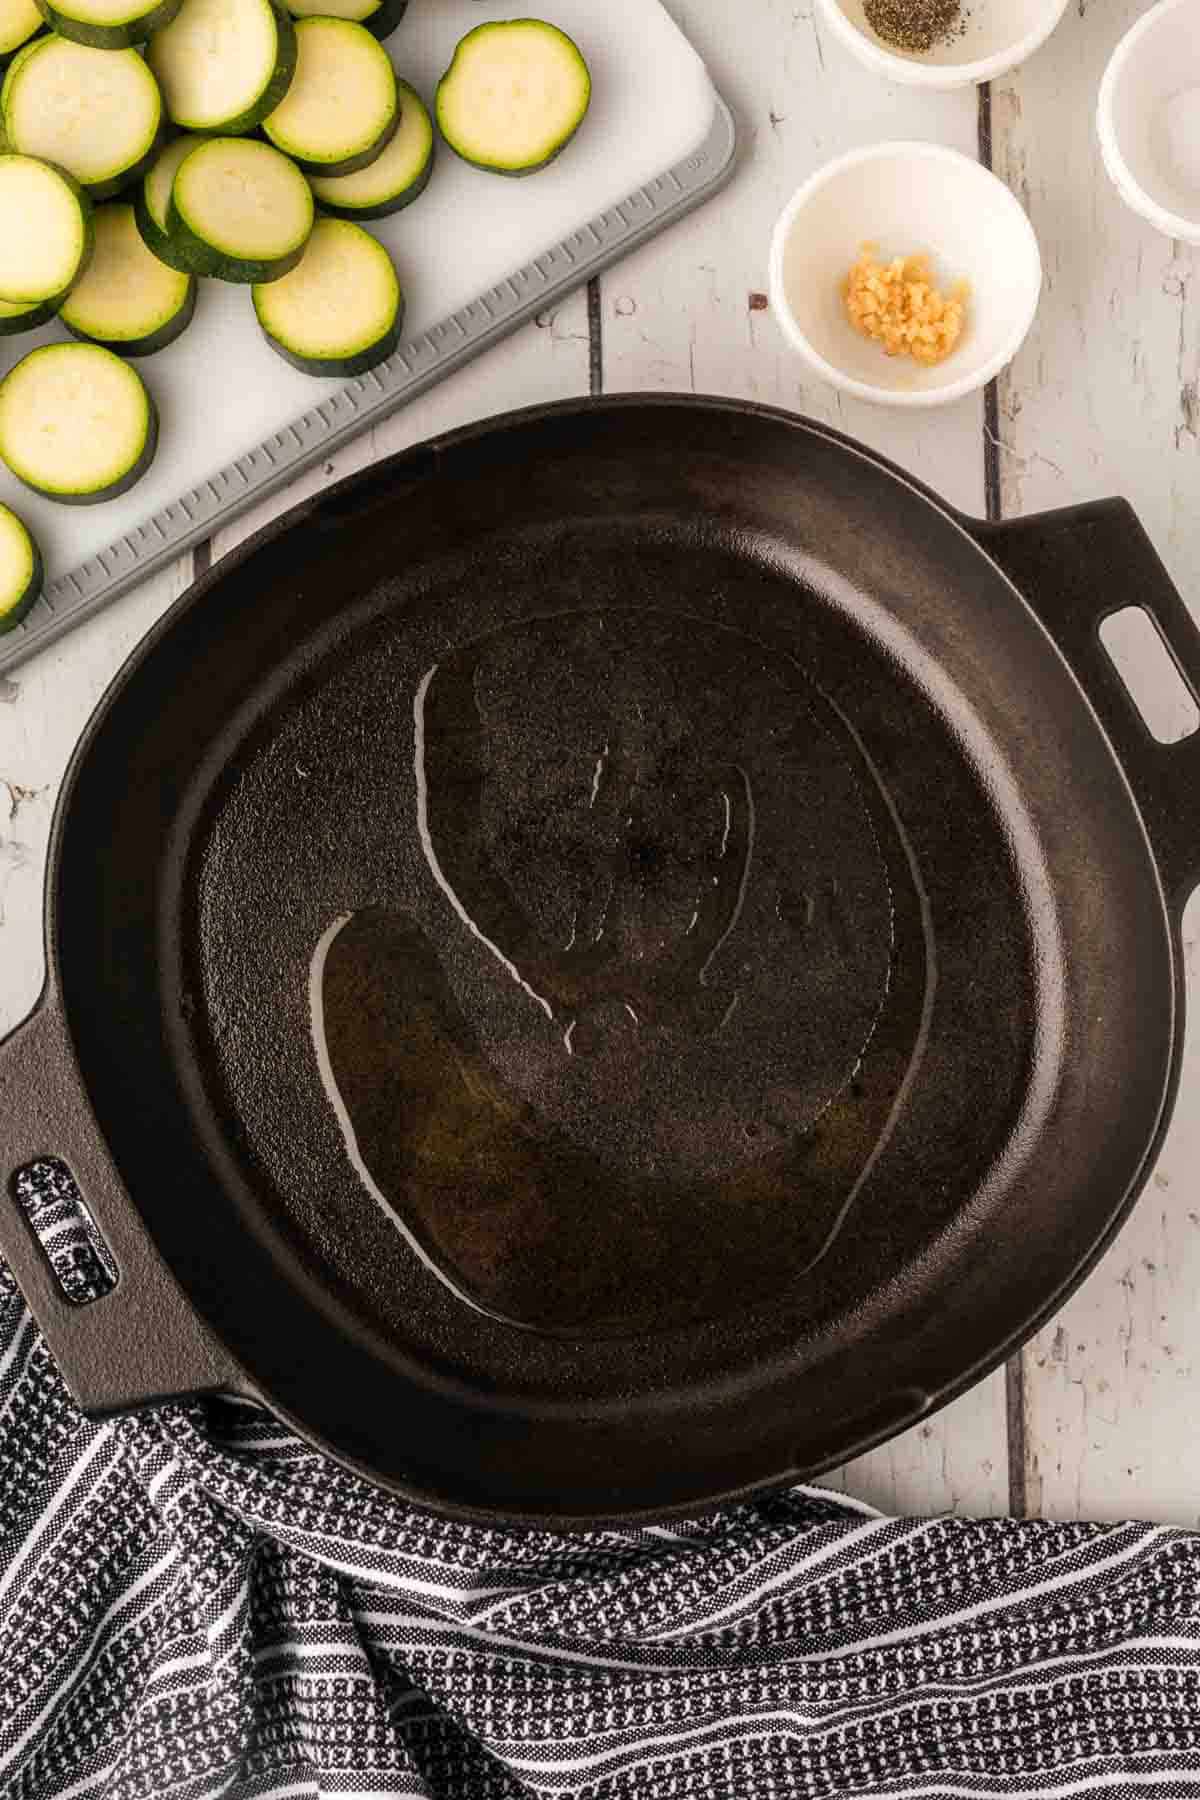 Placing oil in the cast iron skillet